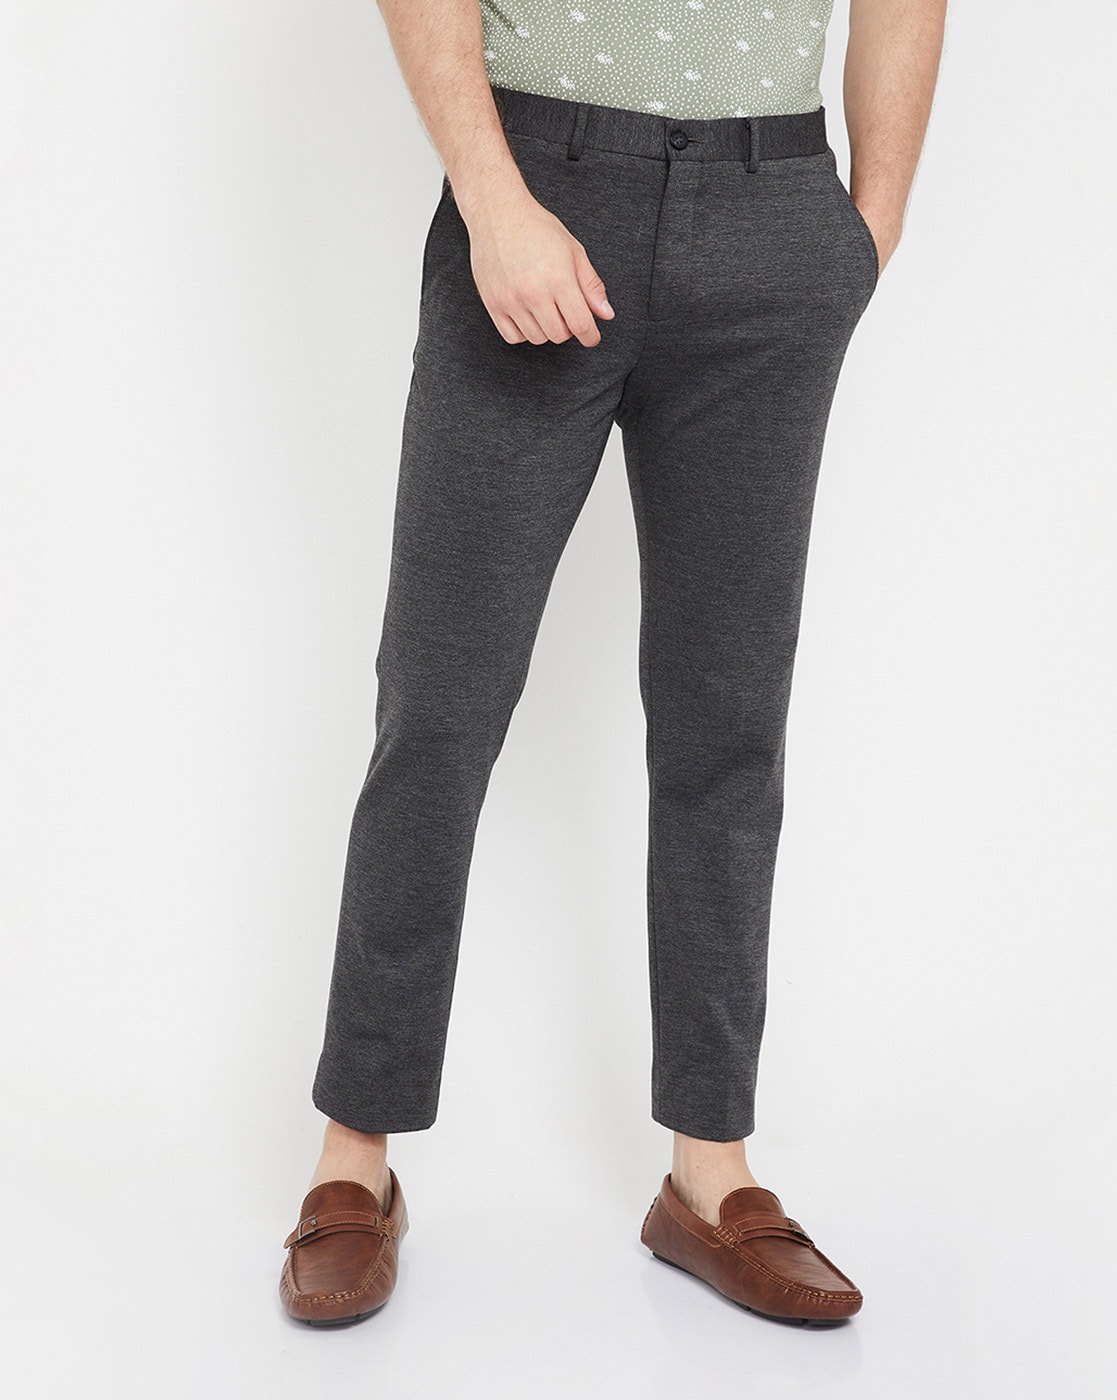 Buy Charcoal Grey Trousers  Pants for Men by NETPLAY Online  Ajiocom